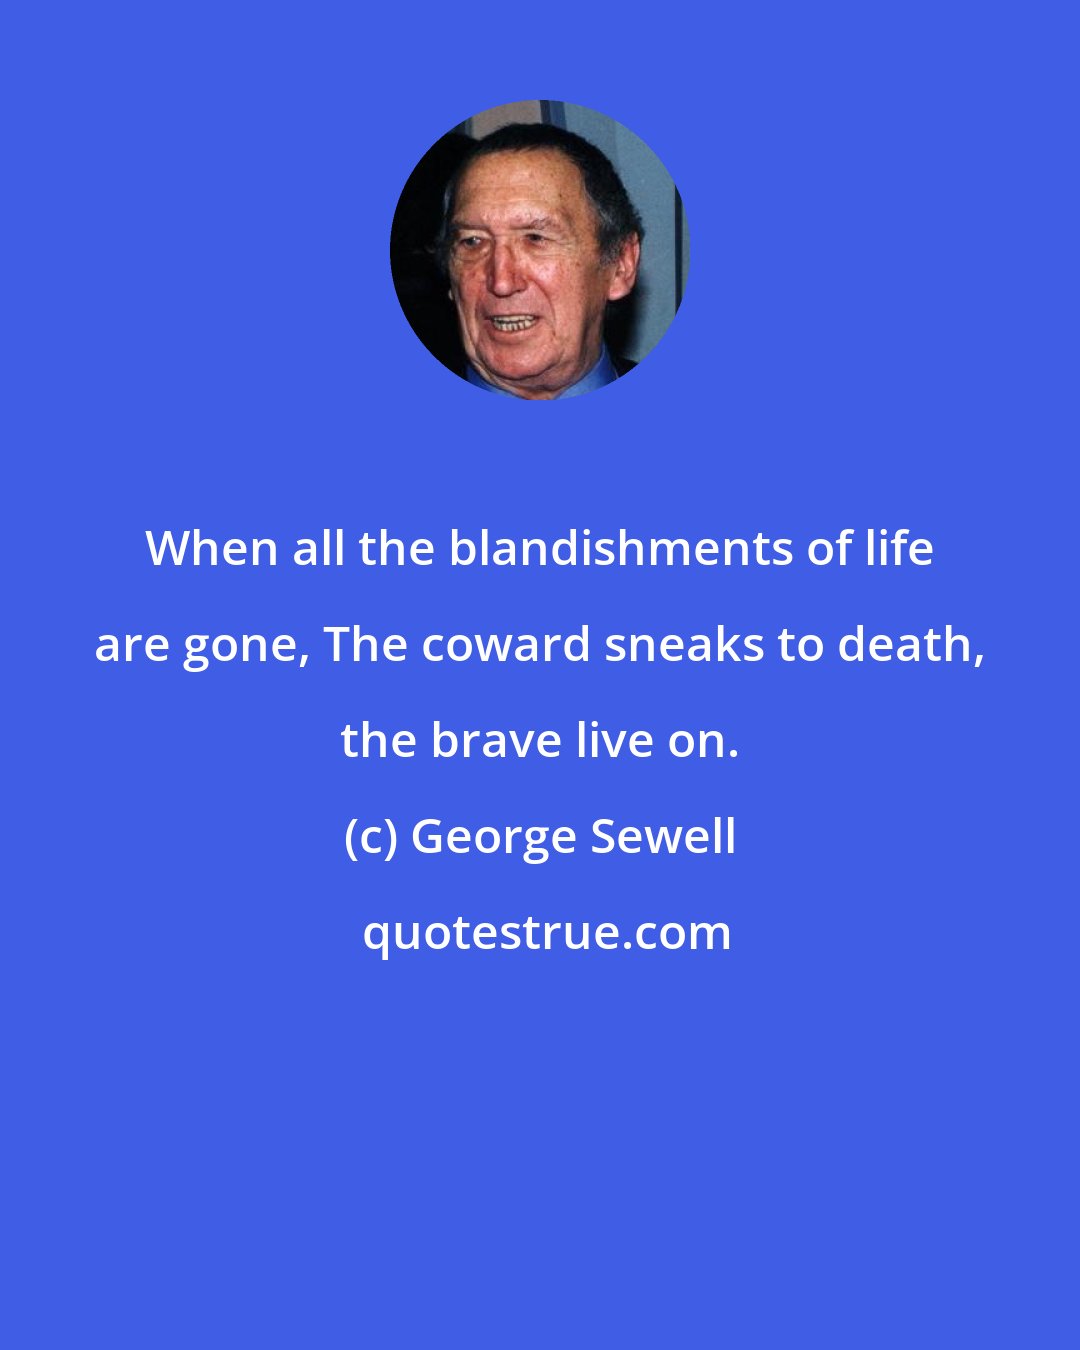 George Sewell: When all the blandishments of life are gone, The coward sneaks to death, the brave live on.